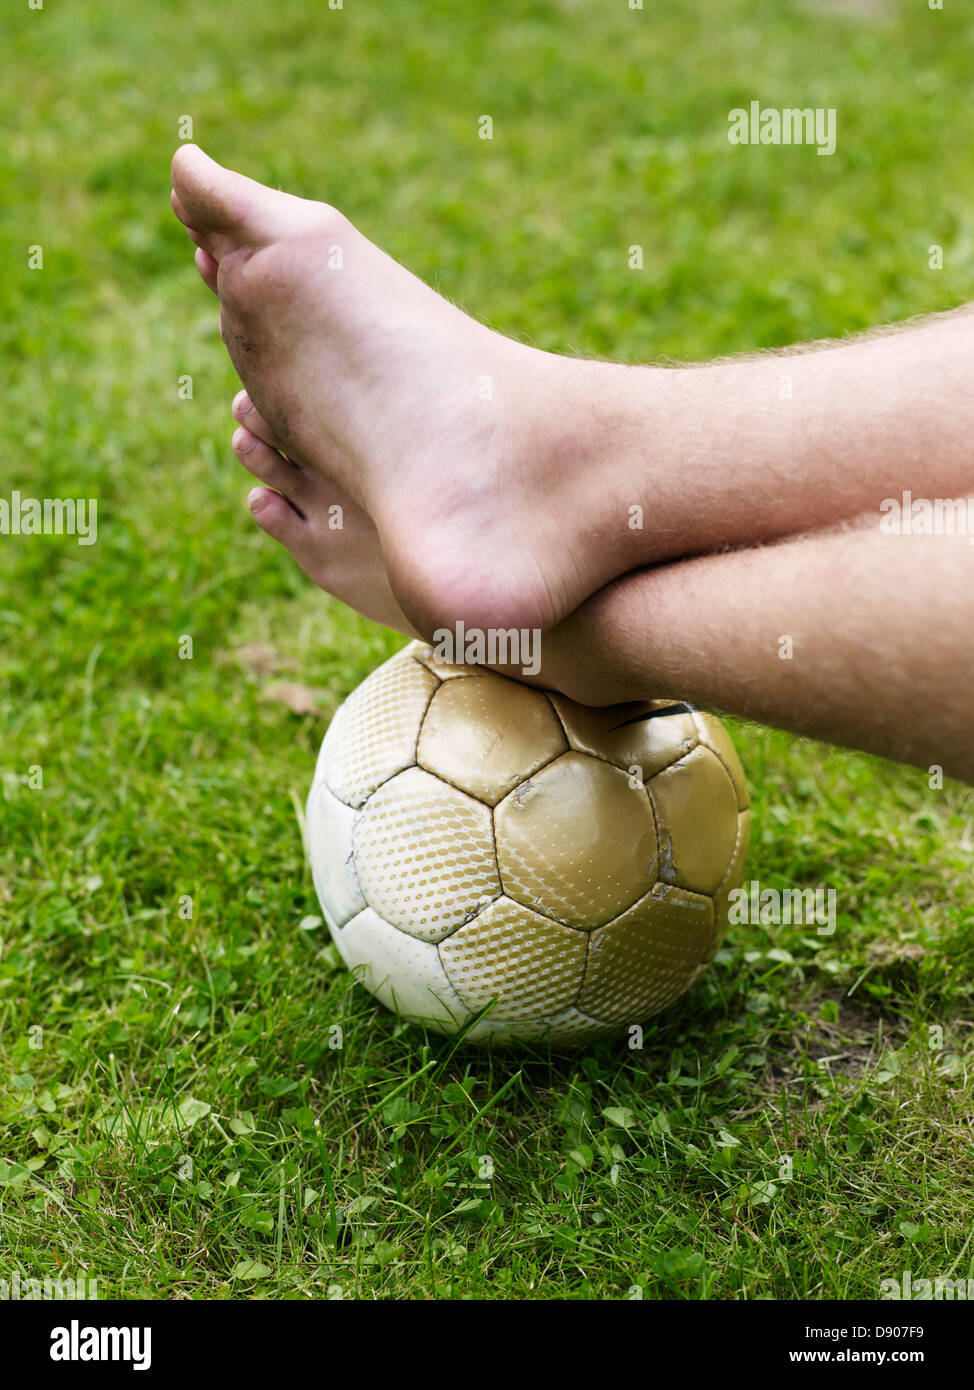 Bare foot on soccer ball Stock Photo